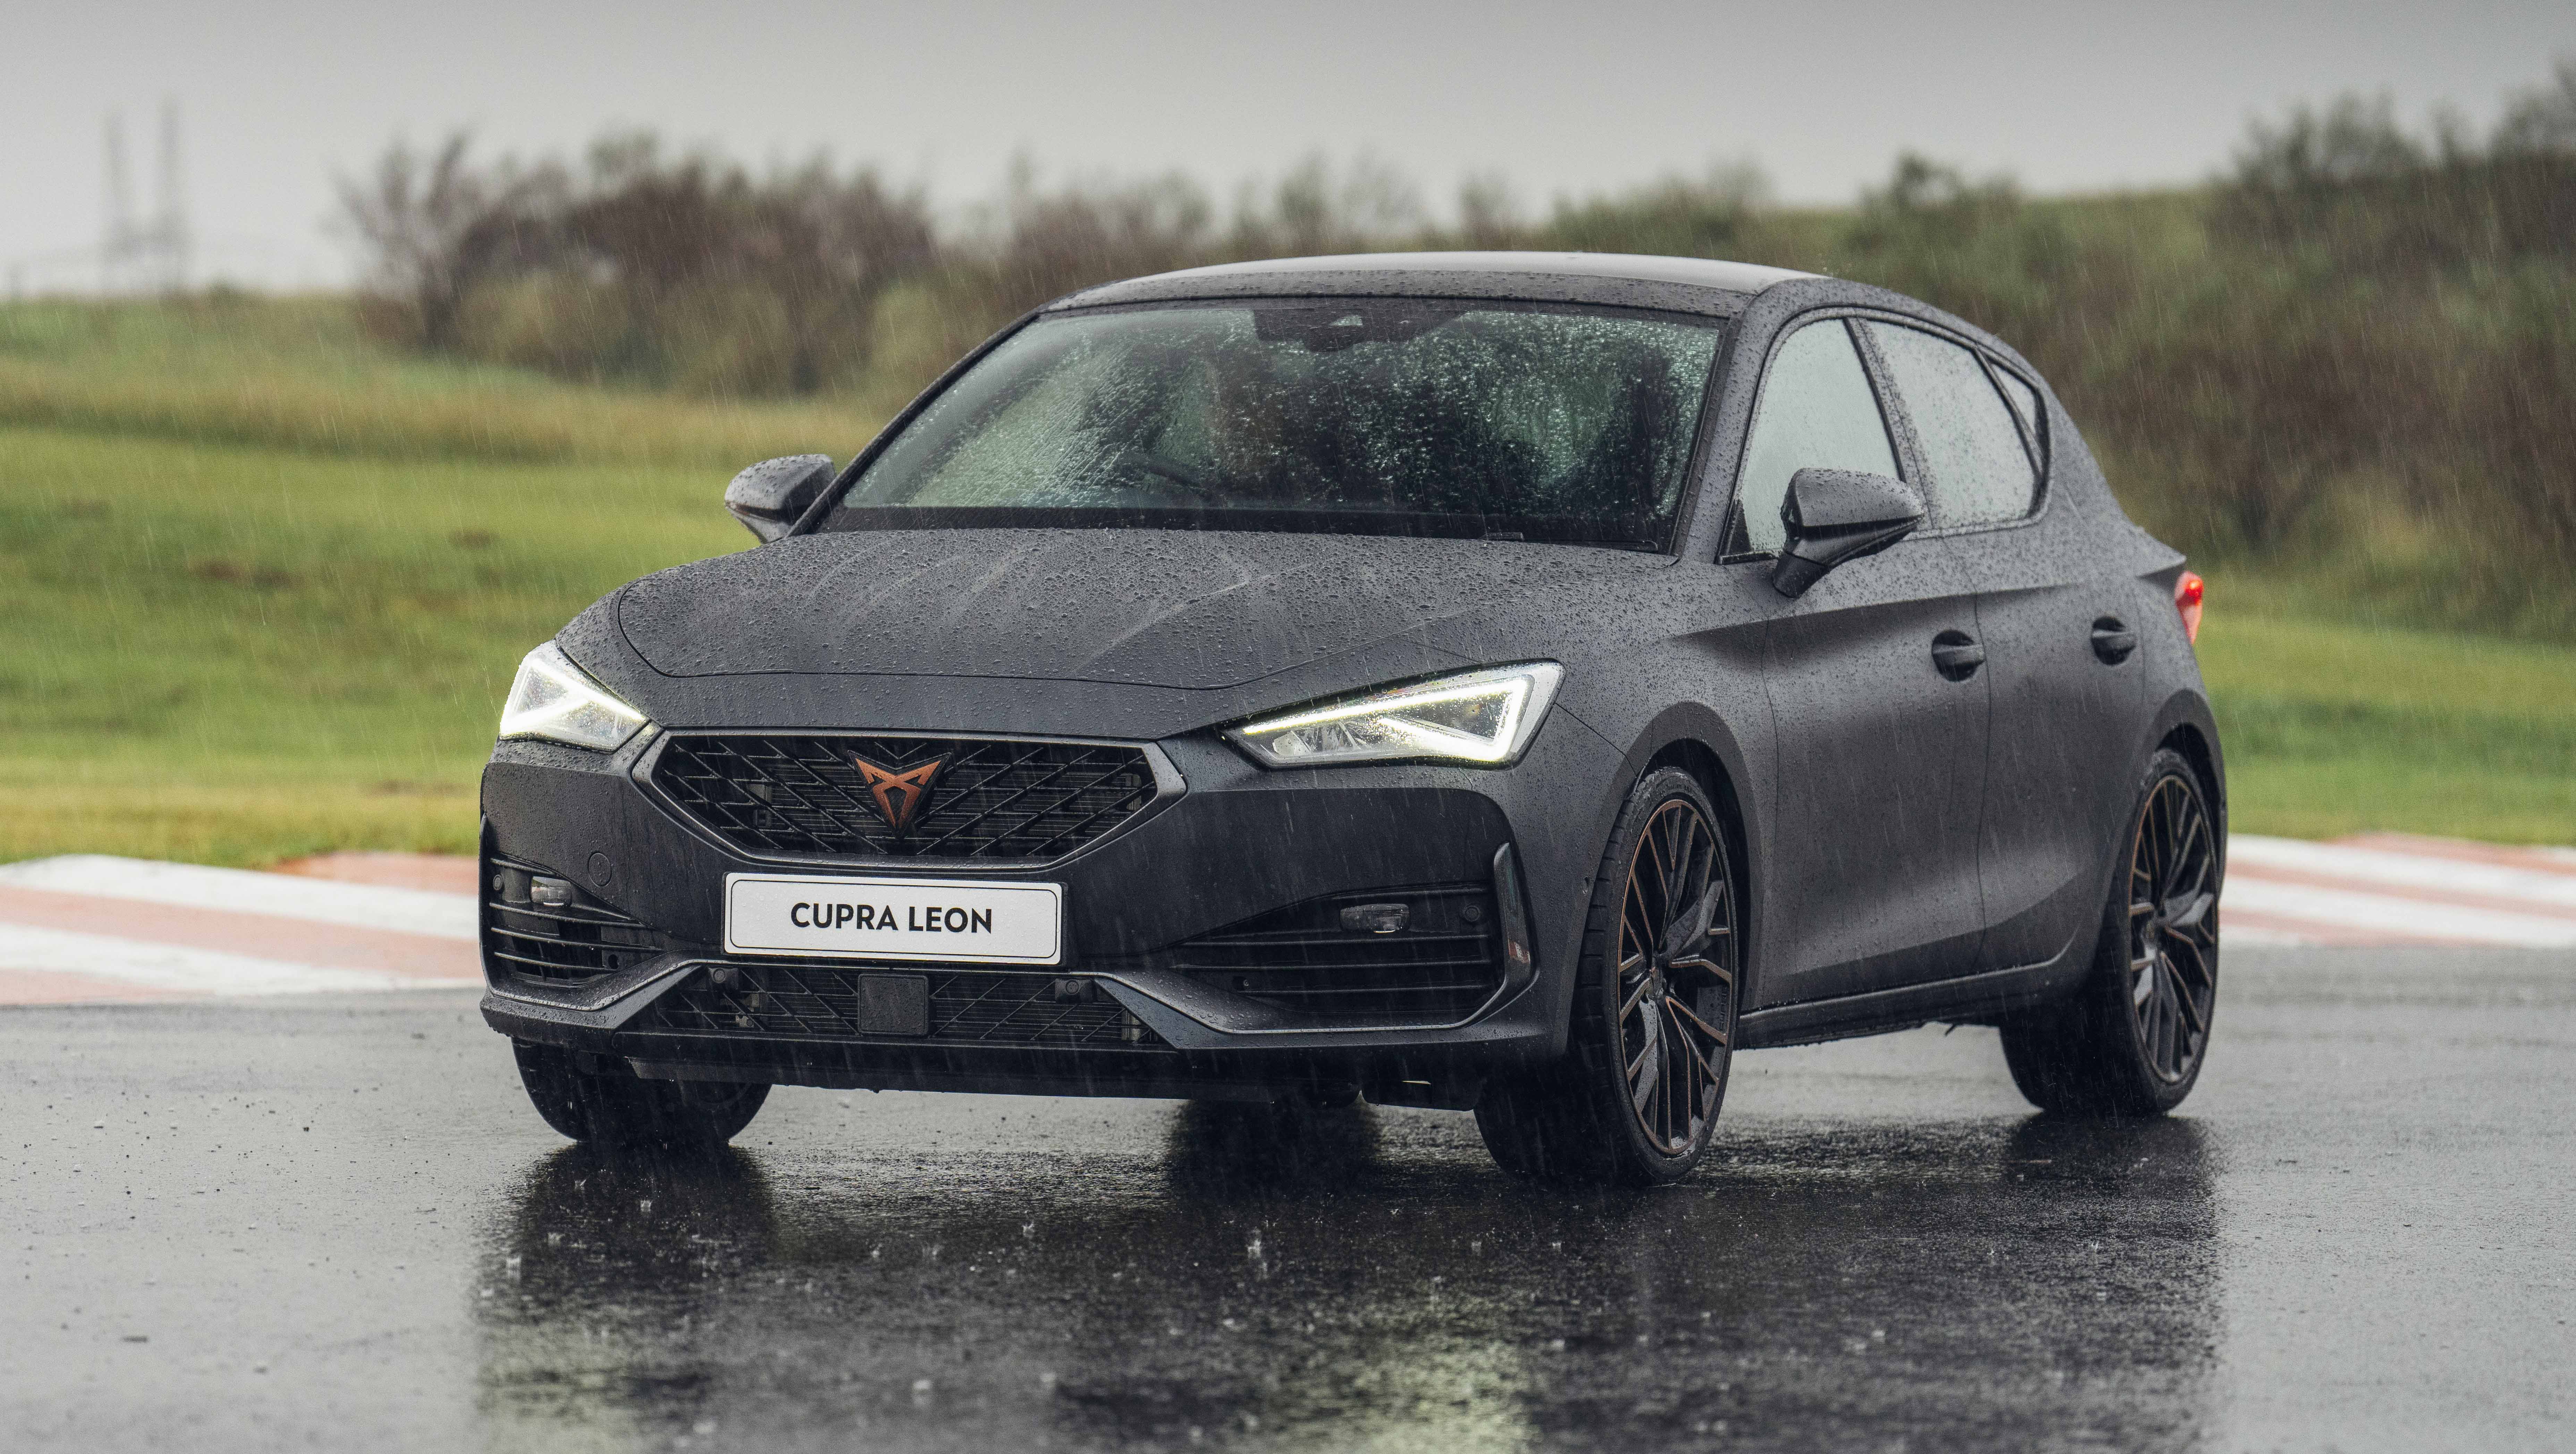 Cupra Leon 2022 review - Ready to topple Hyundai i30 N and VW Golf GTI?